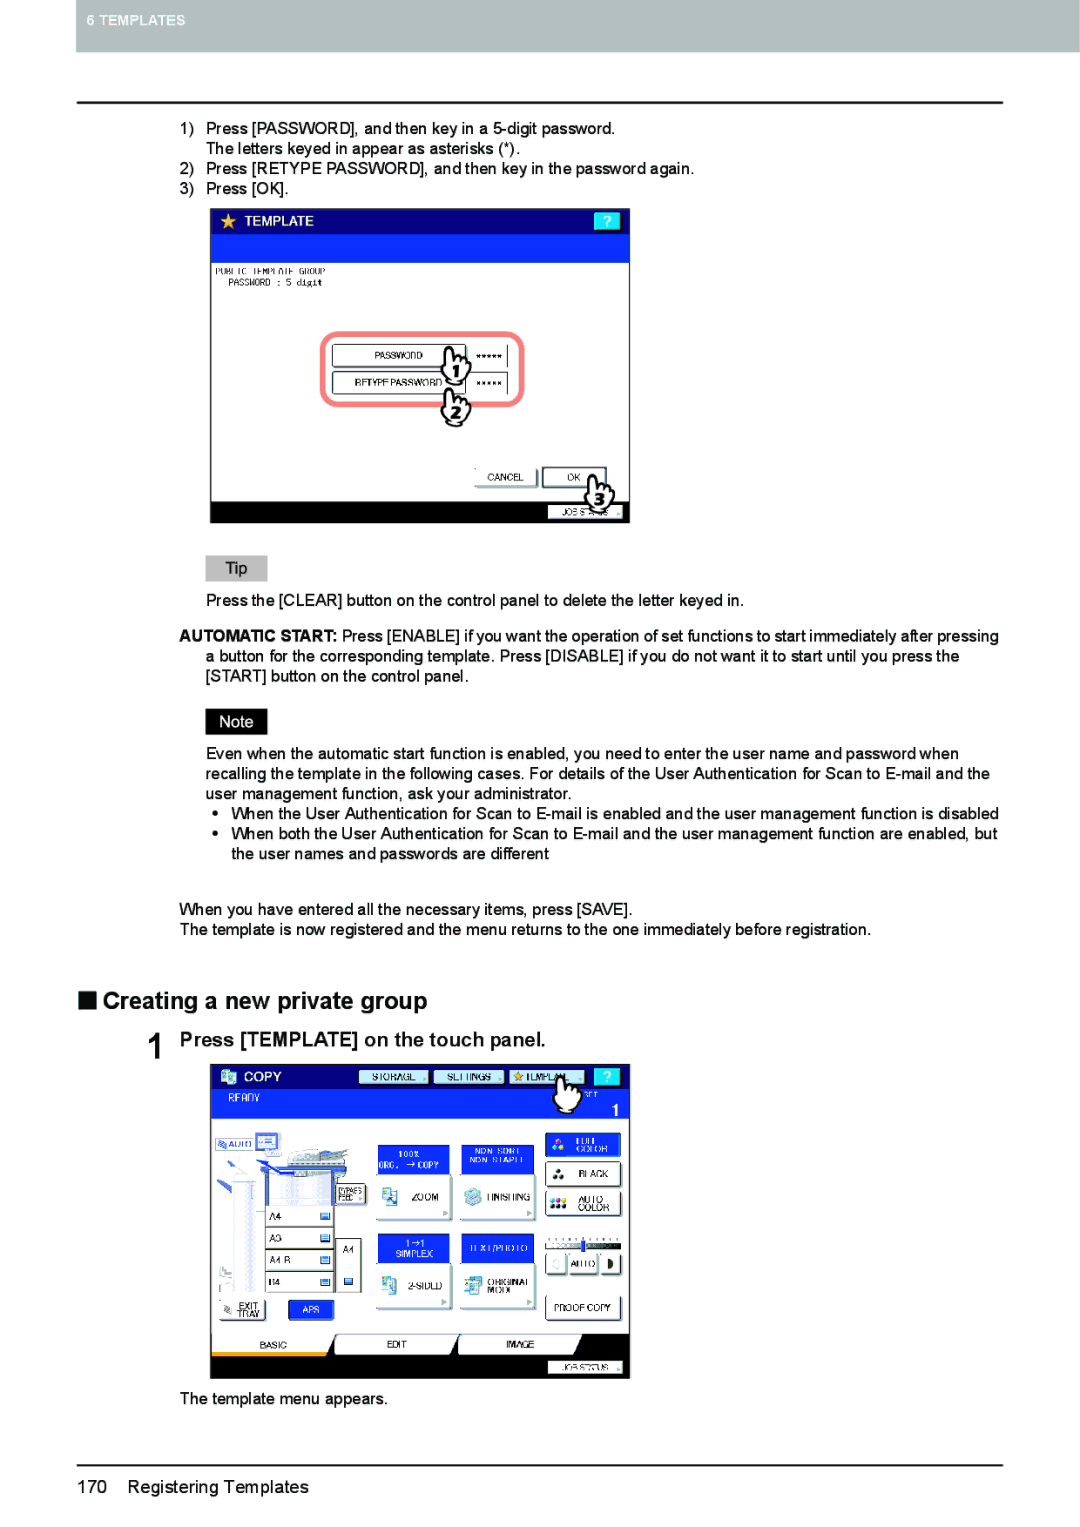 Toshiba 6520c, e-STUDIO5520C manual „ Creating a new private group, Press Template on the touch panel 